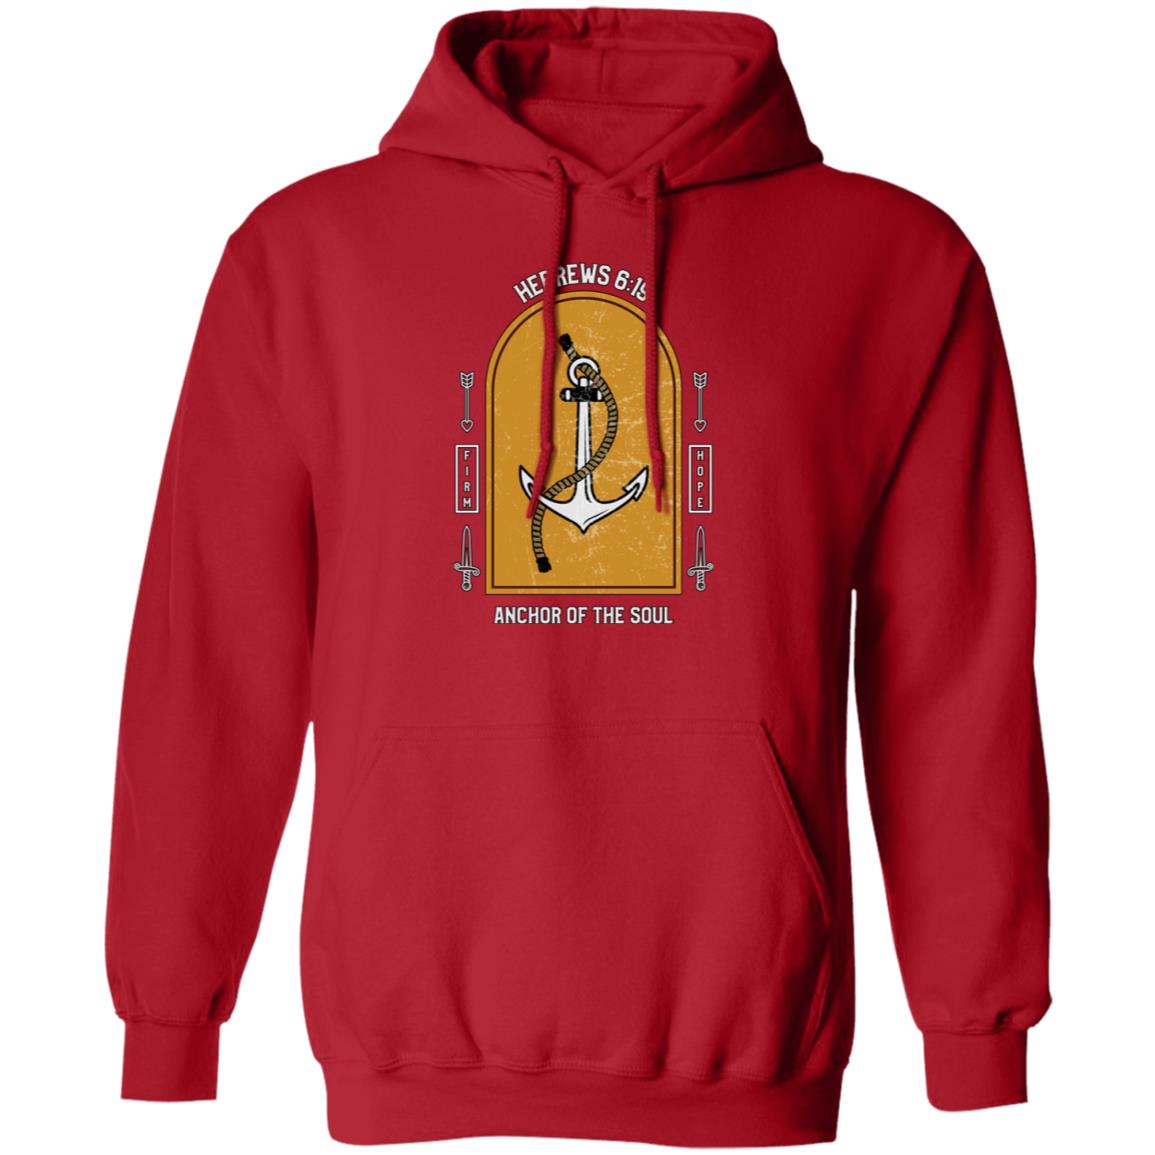 Anchor of The Soul (Unisex Hoodie)